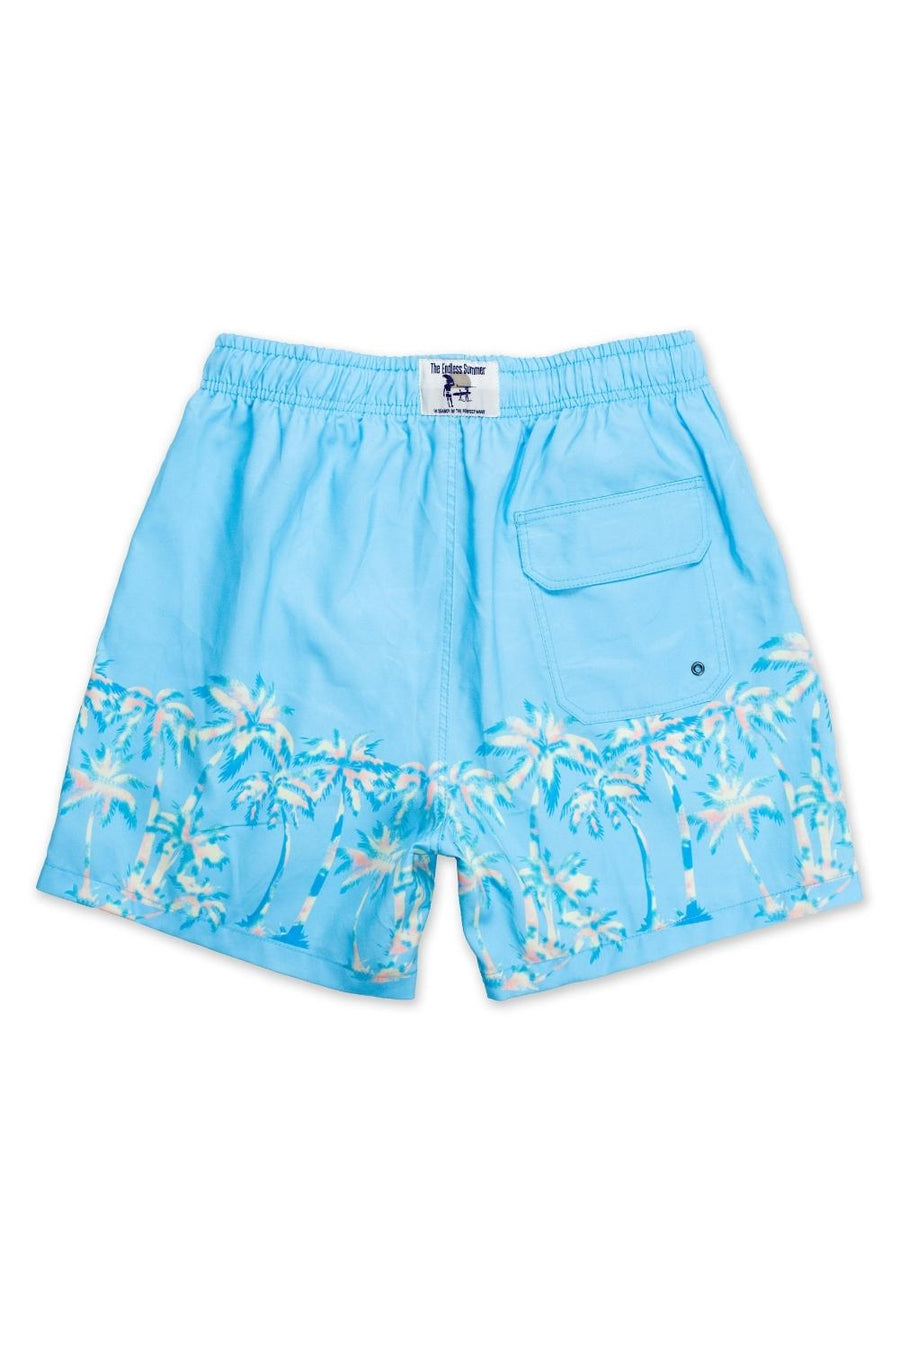 Blue Men's Swimming Trunks With Palm Trees - Vacay Land 